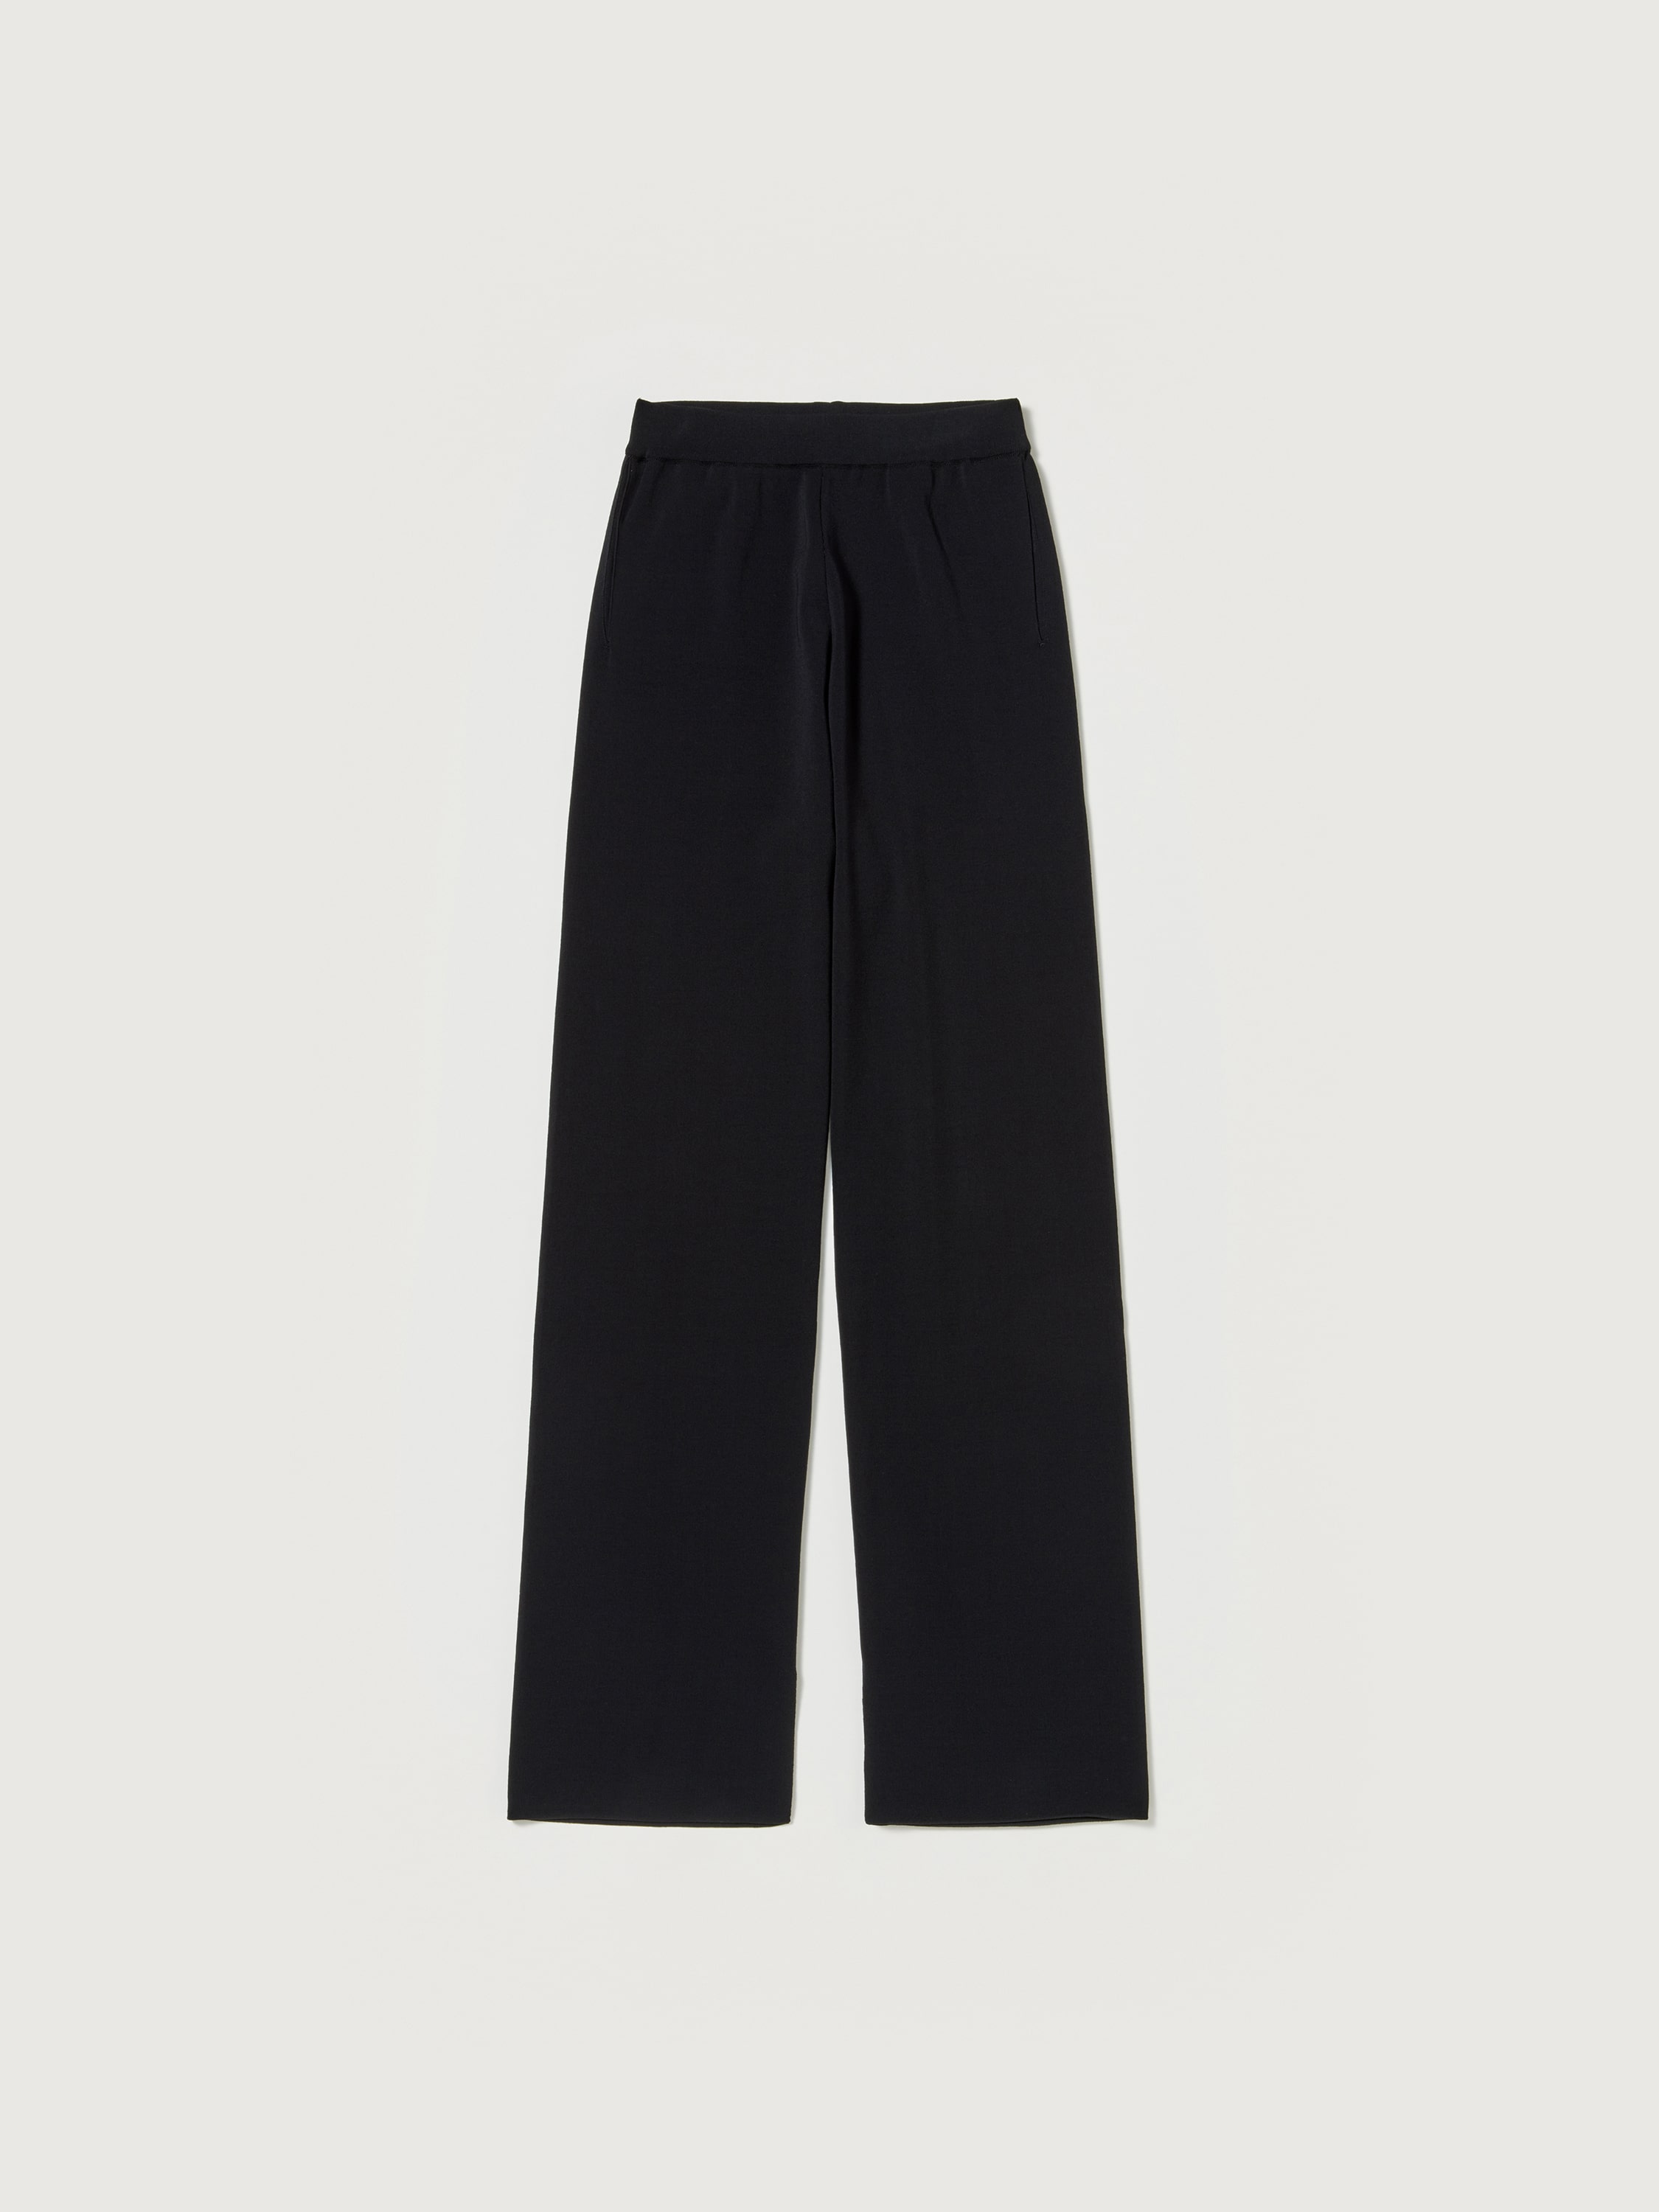 WOOL RECYCLE POLYESTER HIGH GAUGE KNIT PANTS 詳細画像 BLACK 6